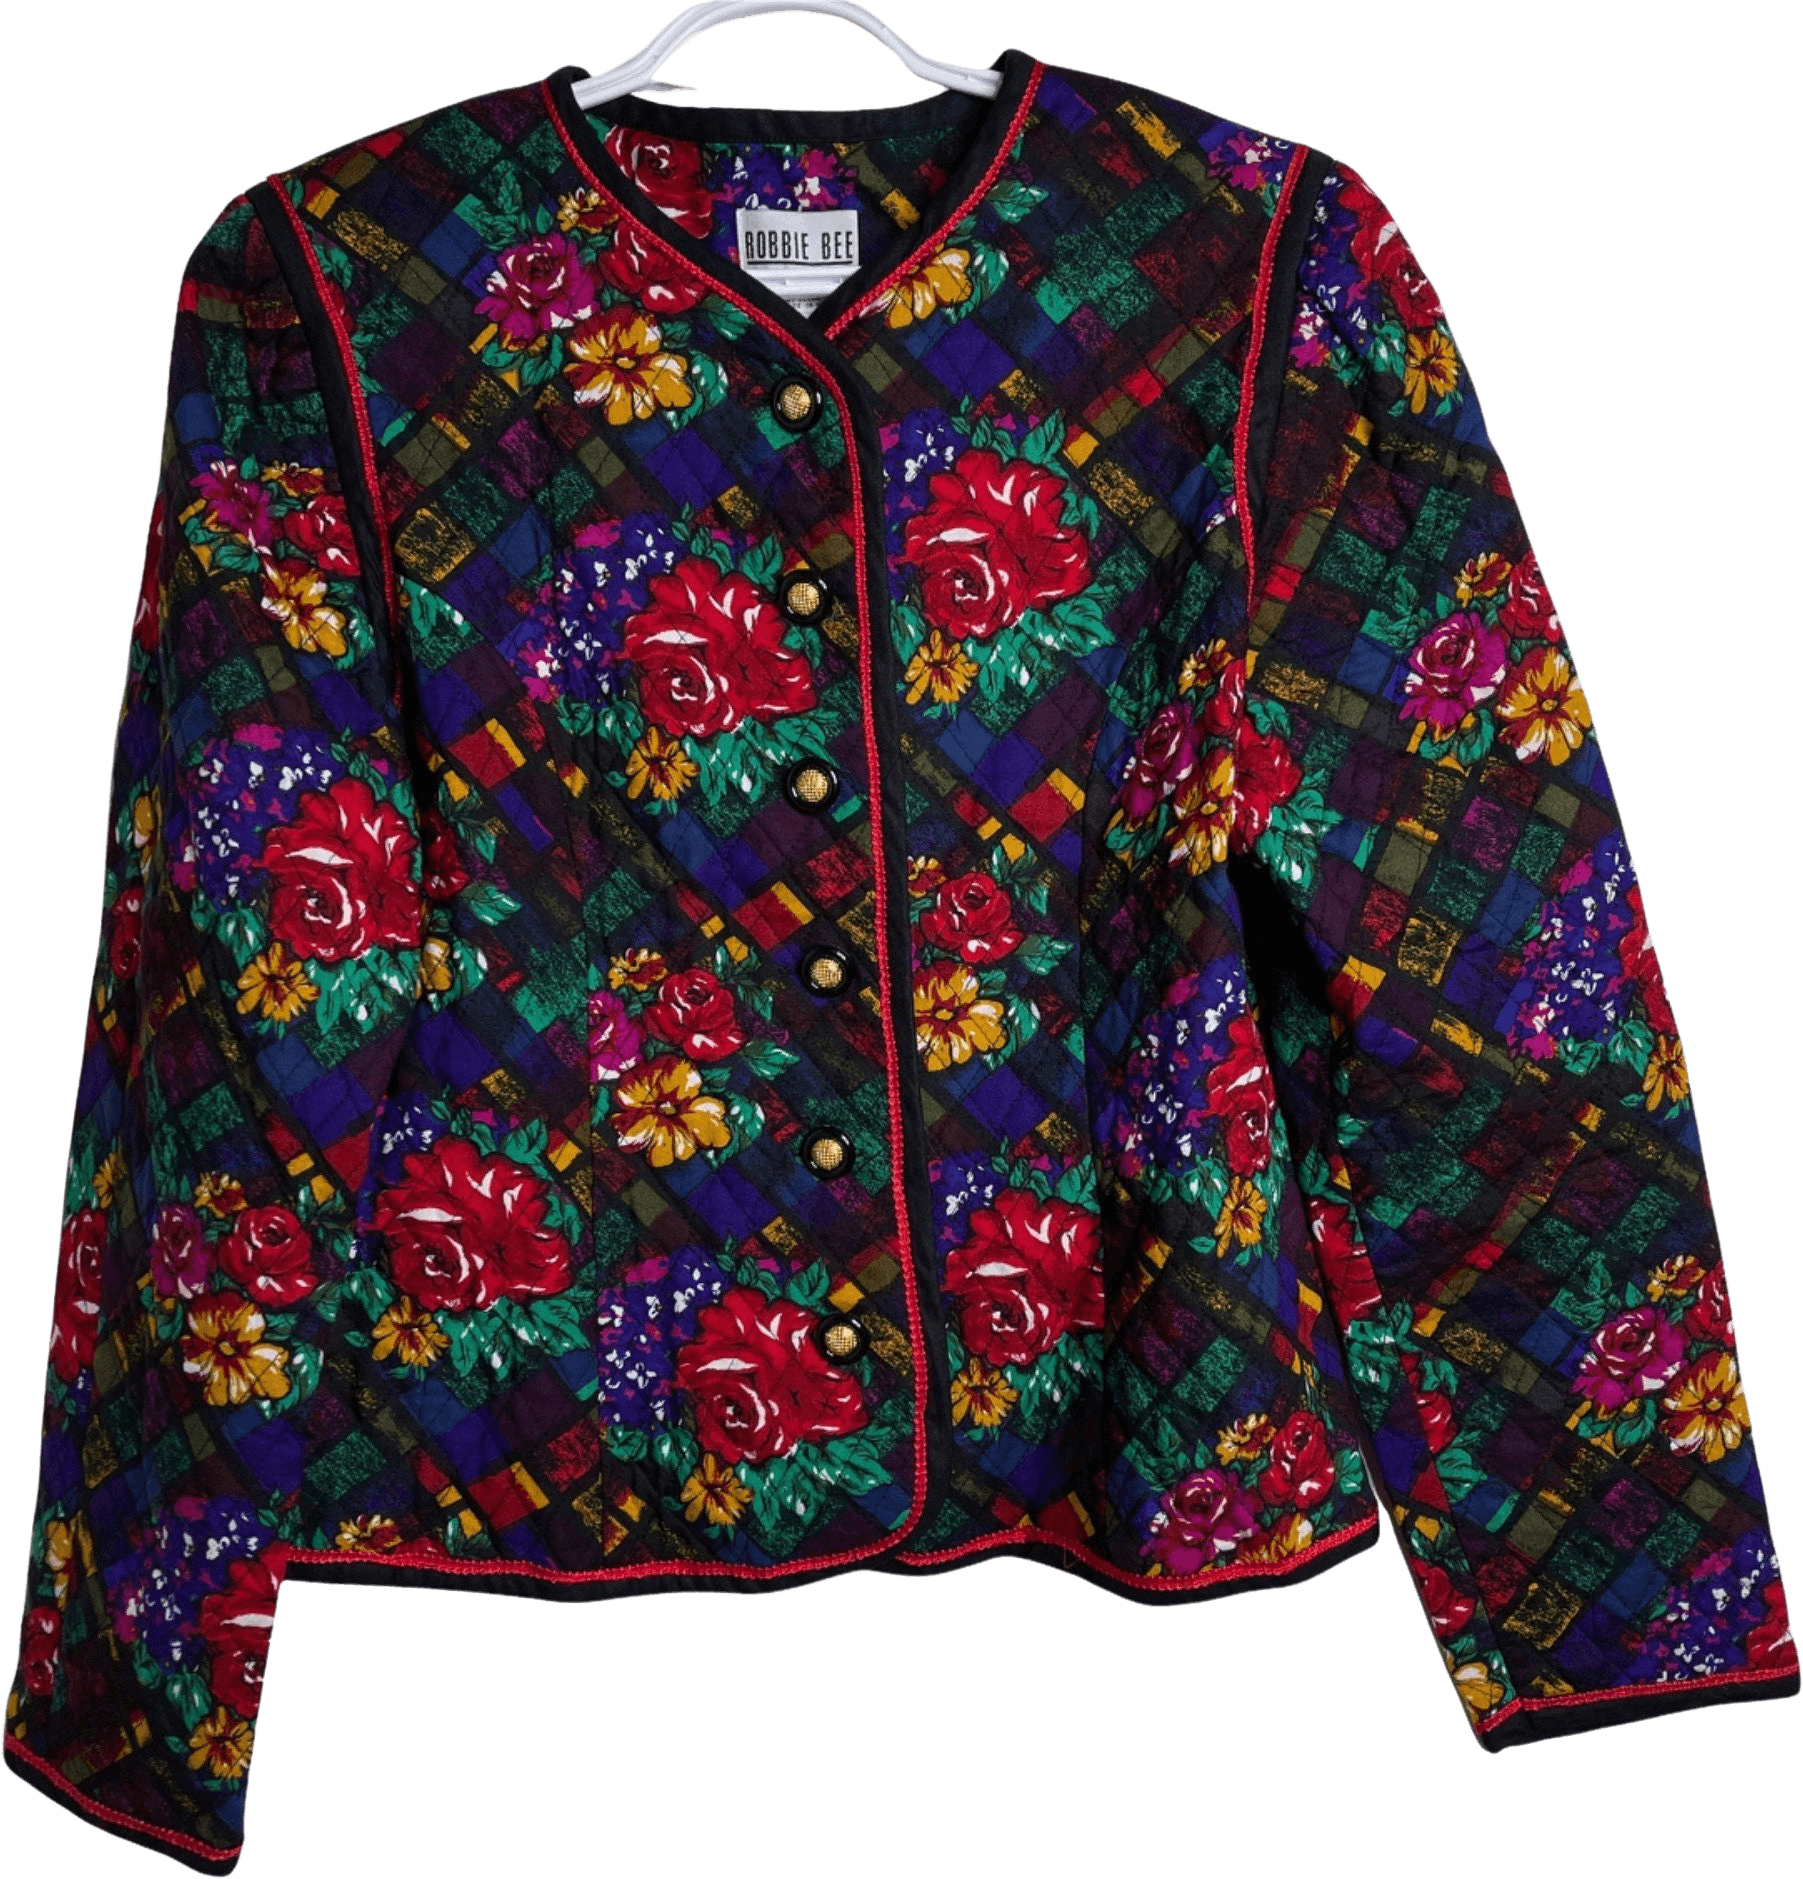 Vintage 90’s Floral Multicolor Quilted Jacket by Robbie Bee | Shop ...